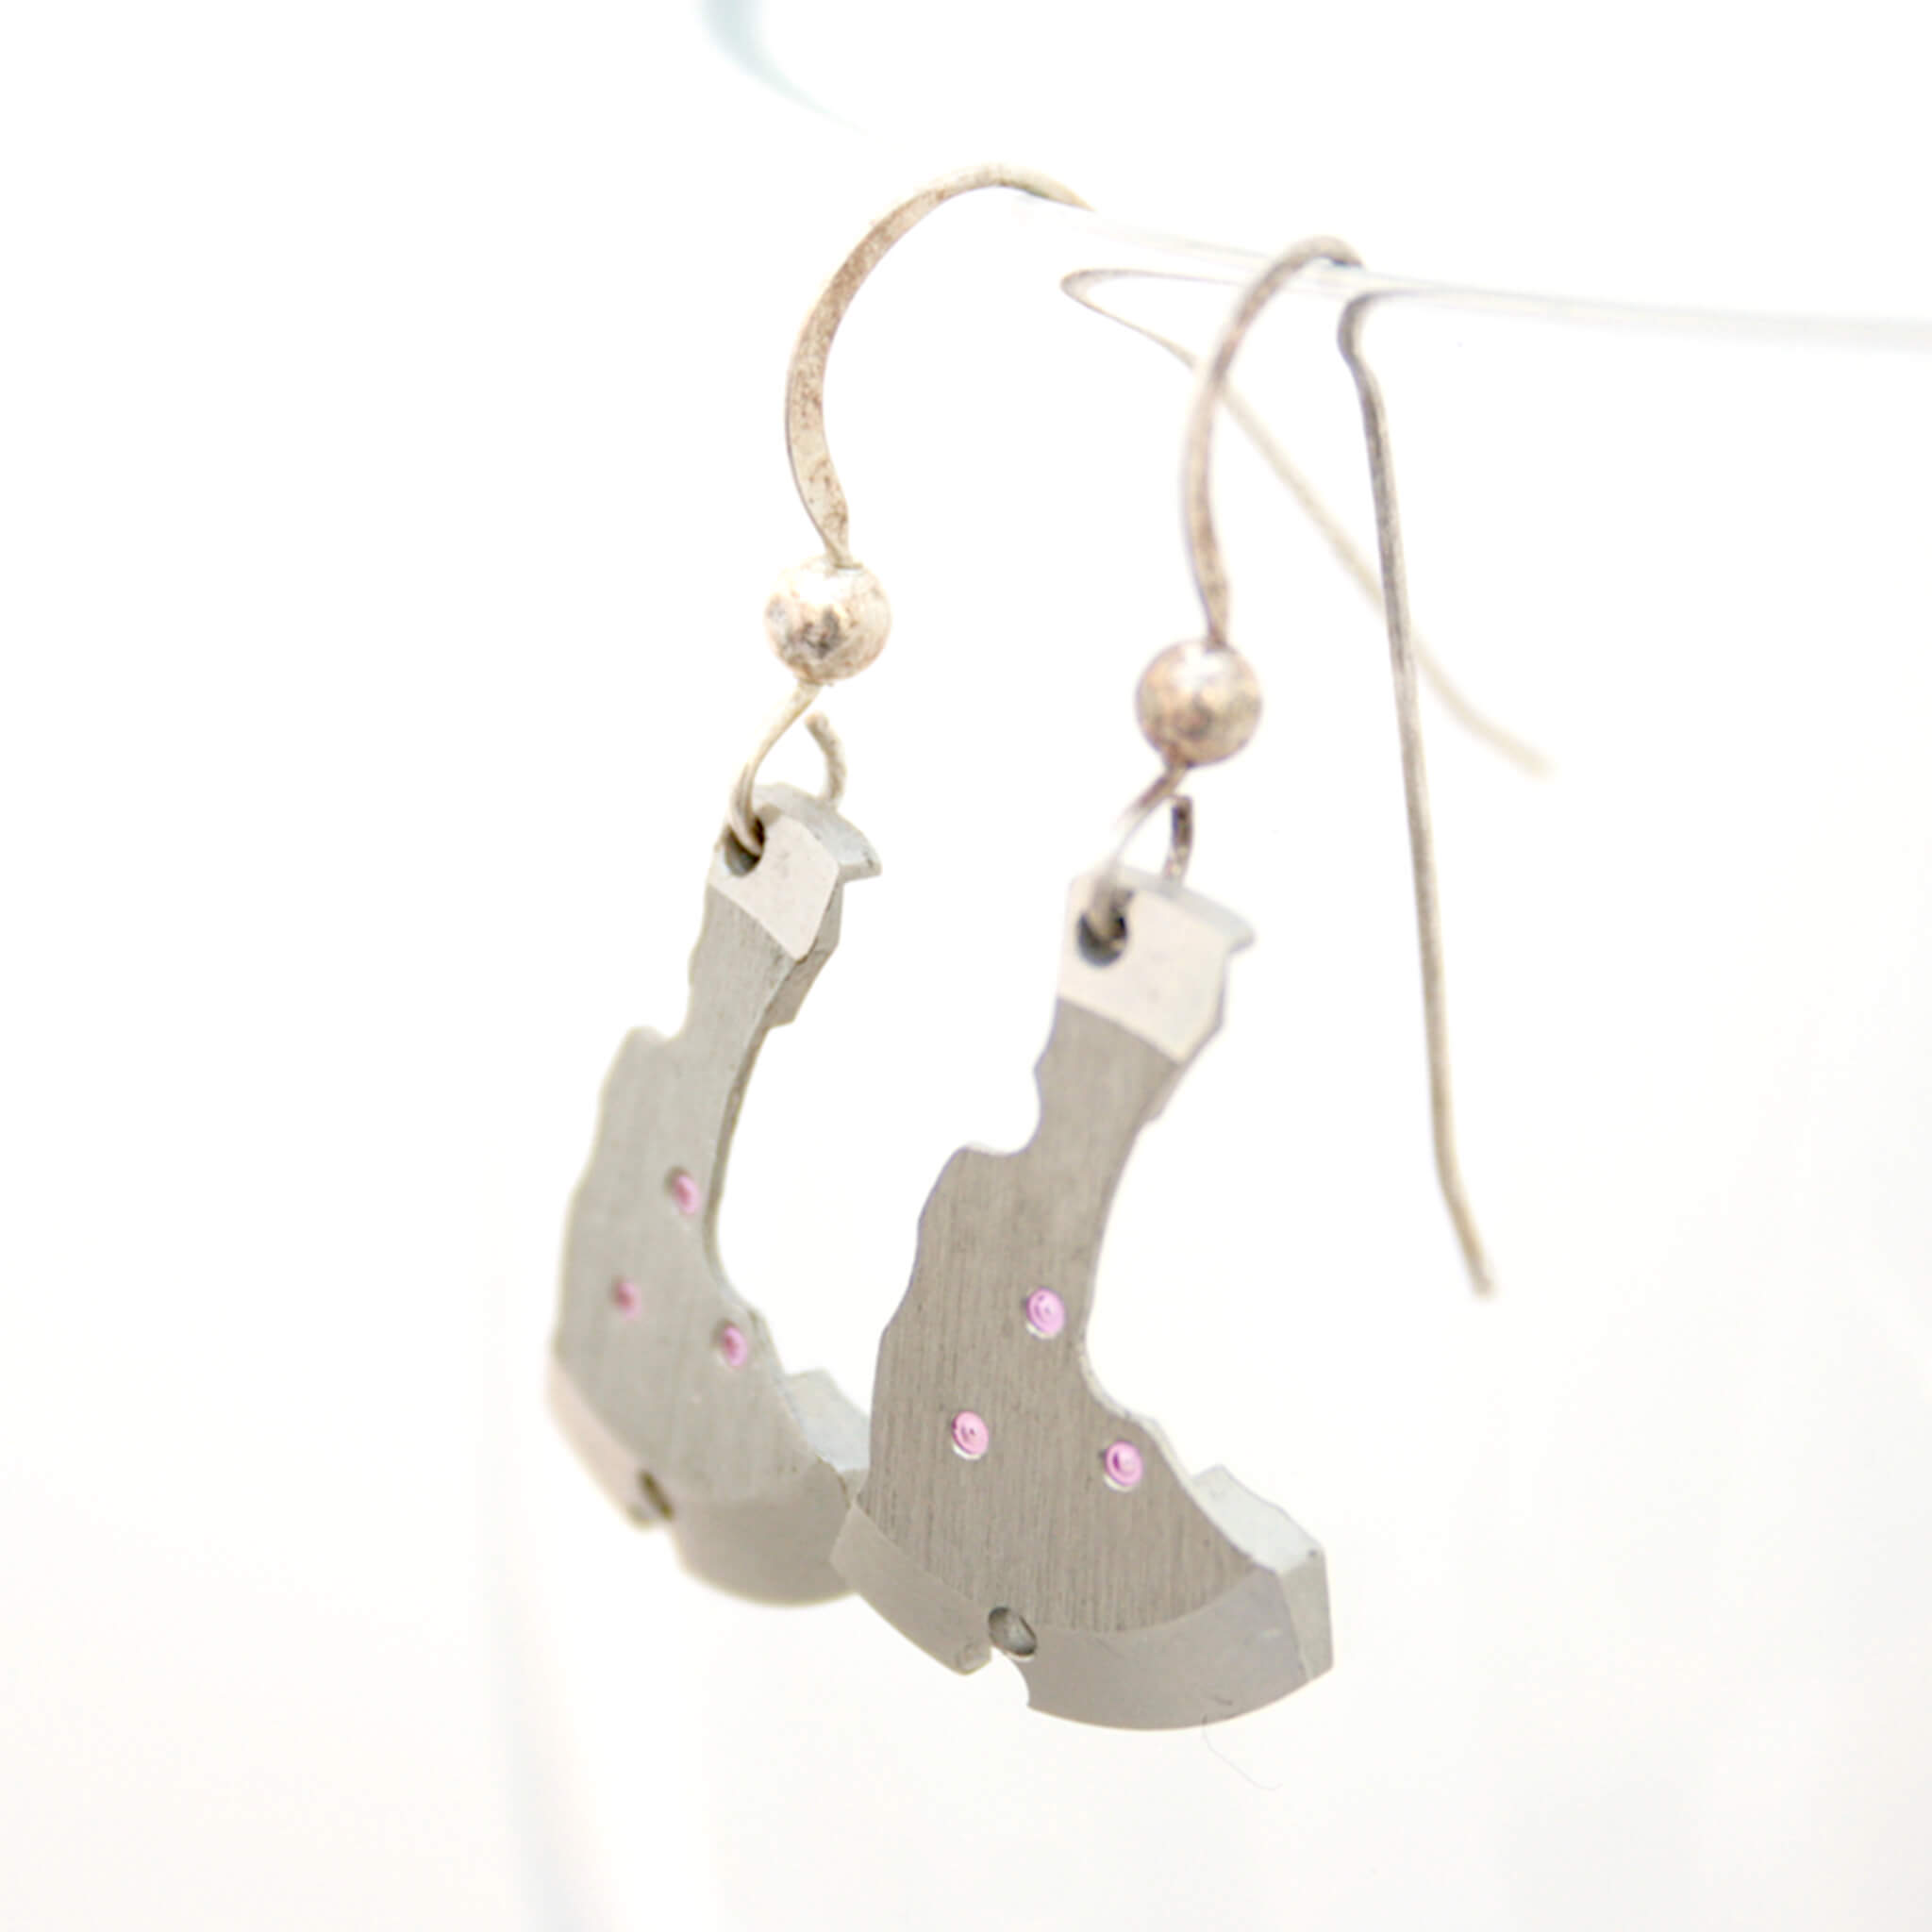 watch parts turned into dangling earrings hanging on a glass